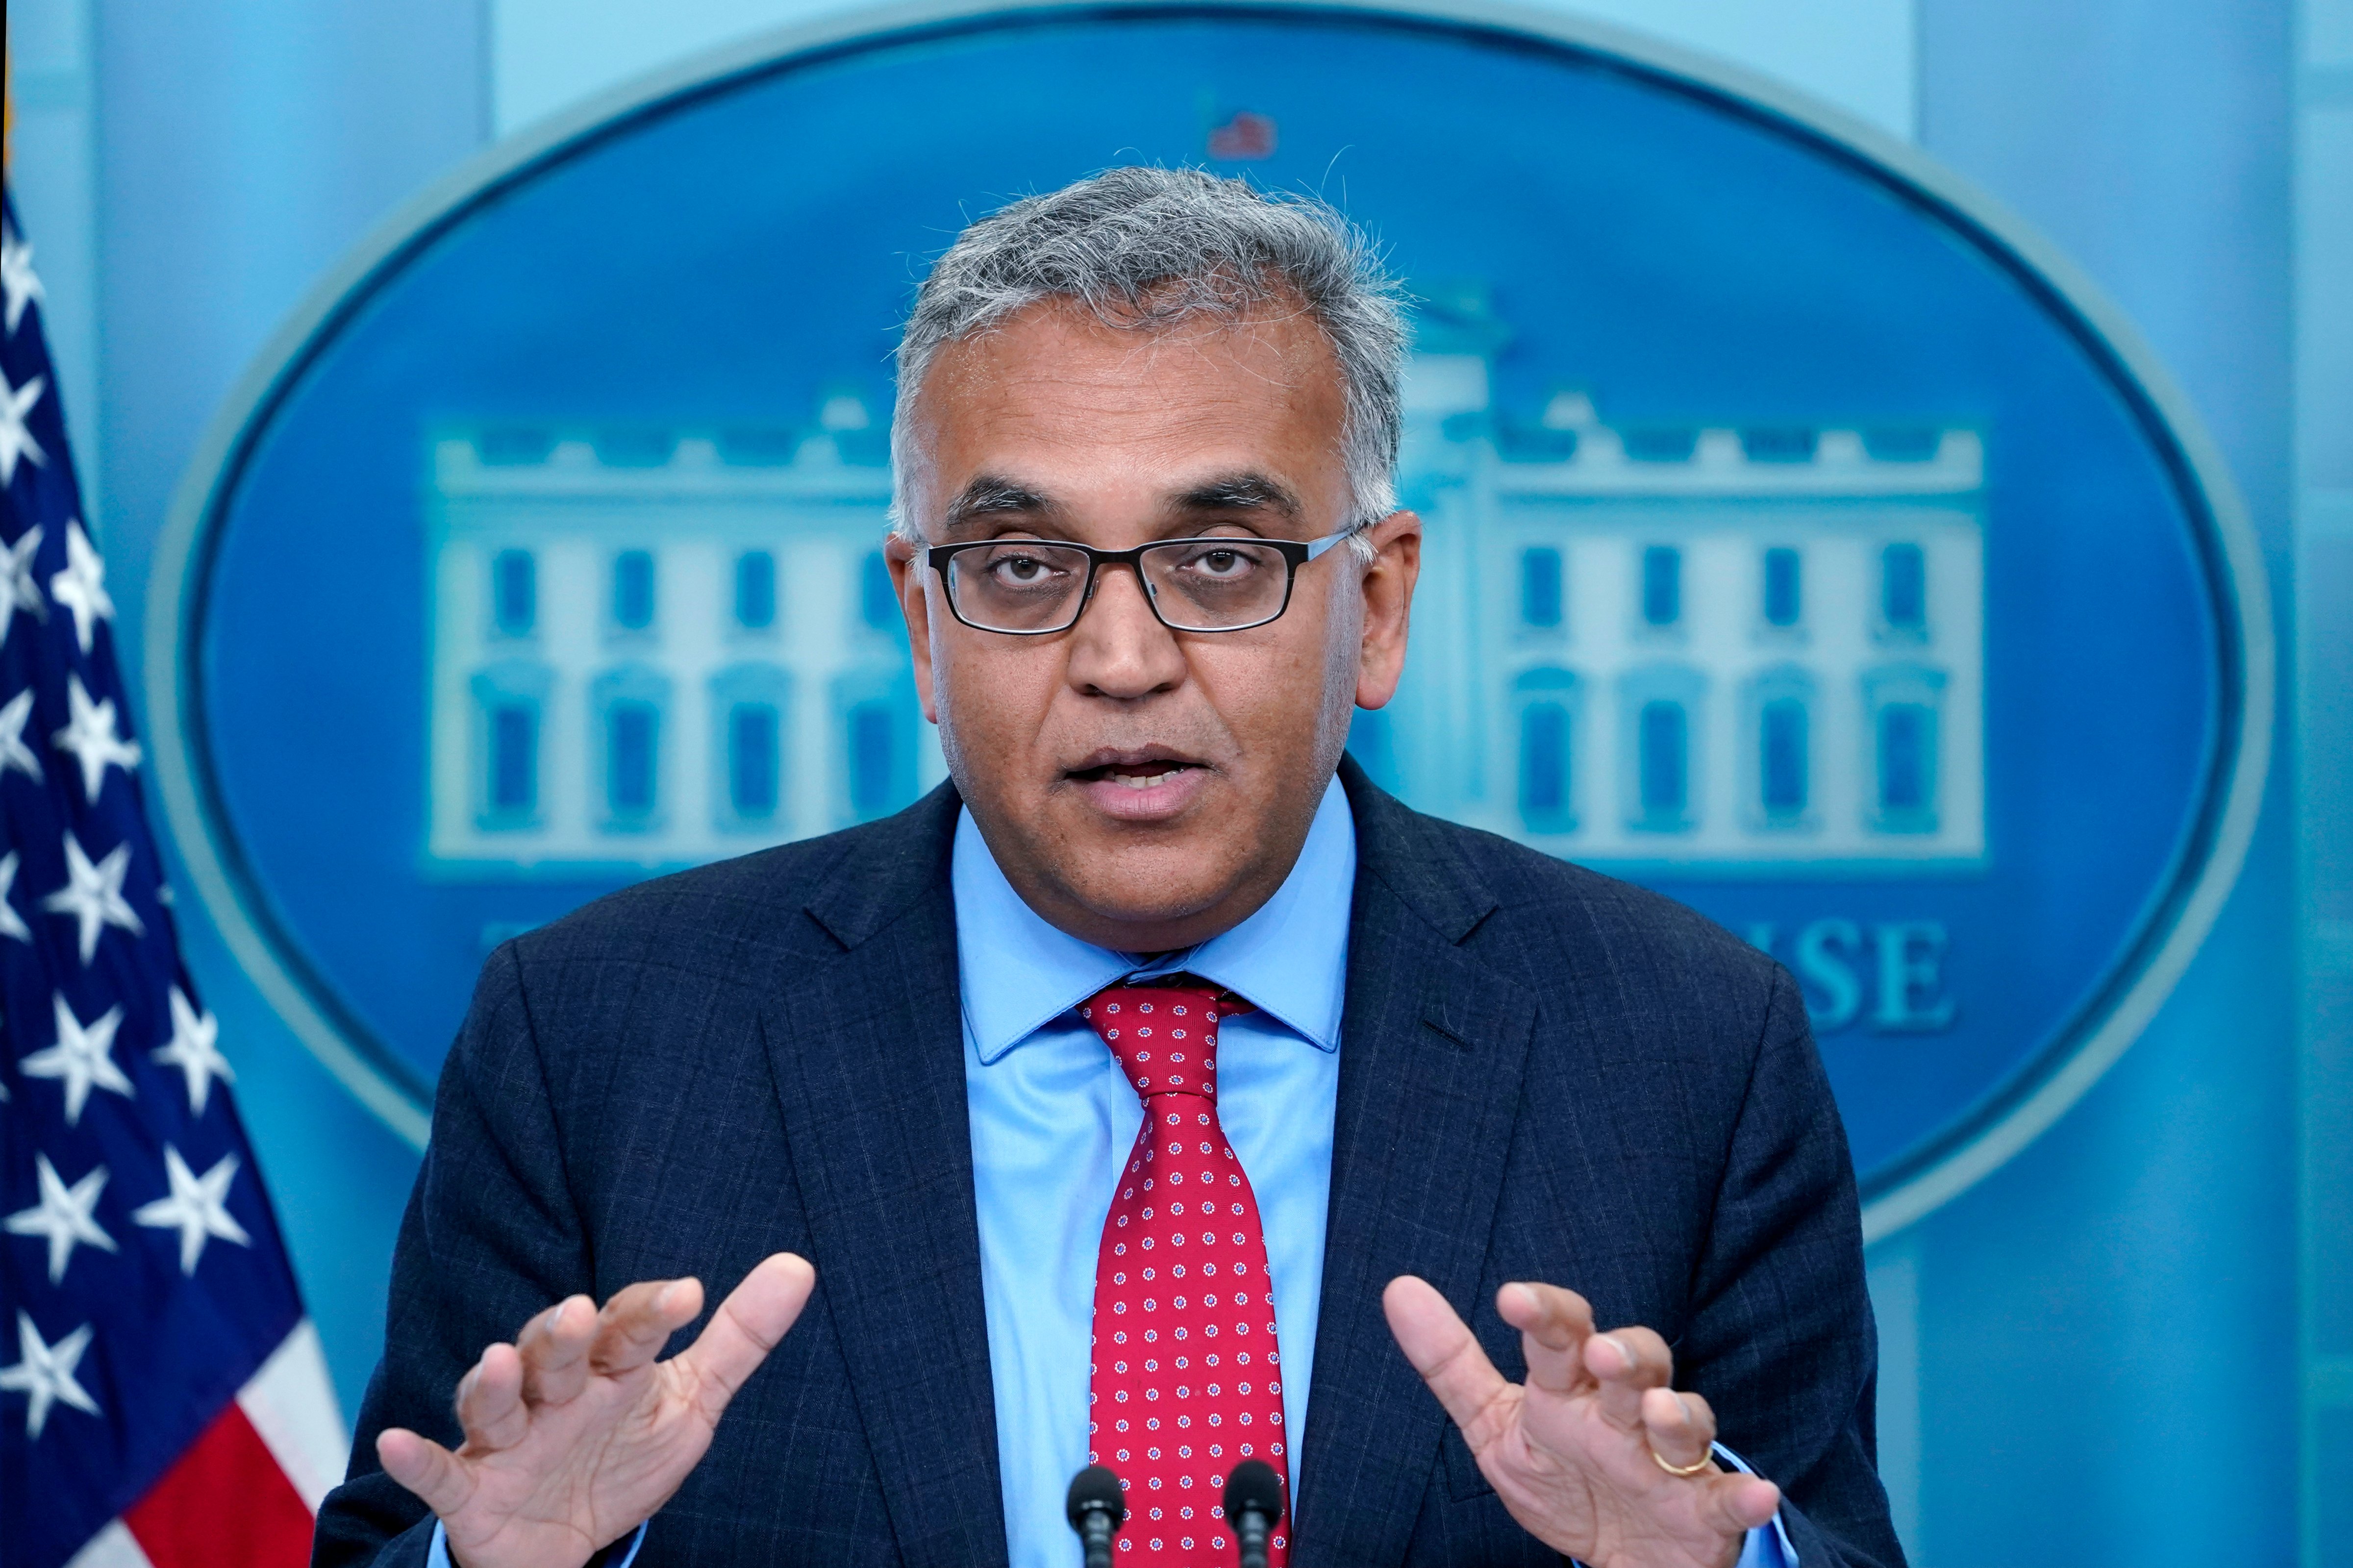 White House COVID-19 Response Coordinator Dr. Ashish Jha speaks during the daily briefing at the White House in Washington, April 26, 2022. (AP Photo/Susan Walsh)